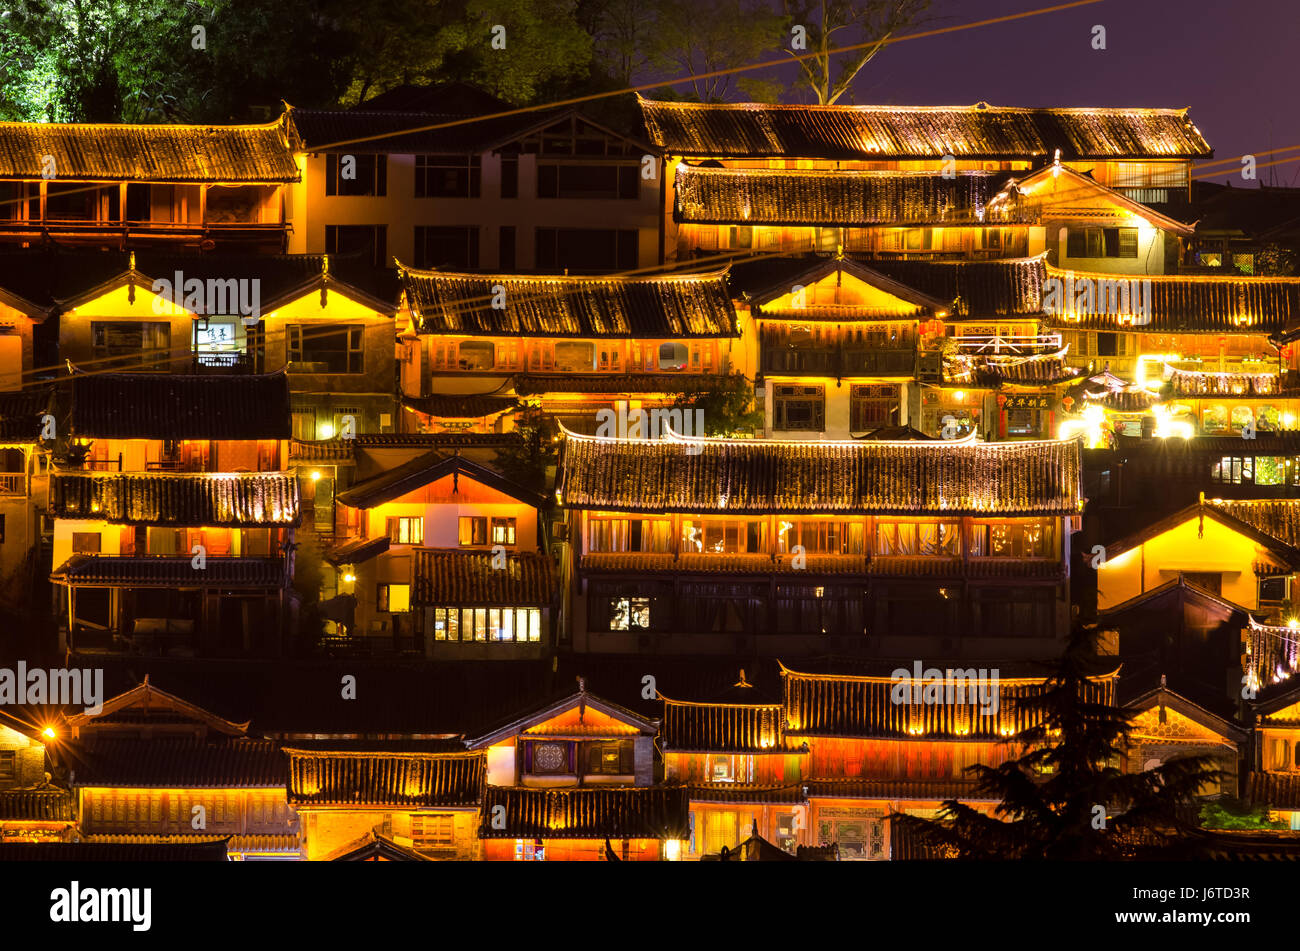 Lijiang, China - April 14,2017 : Night scenic view of the Old Town of Lijiang in Yunnan, China. The Old Town of Lijiang is a UNESCO World Heritage Sit Stock Photo